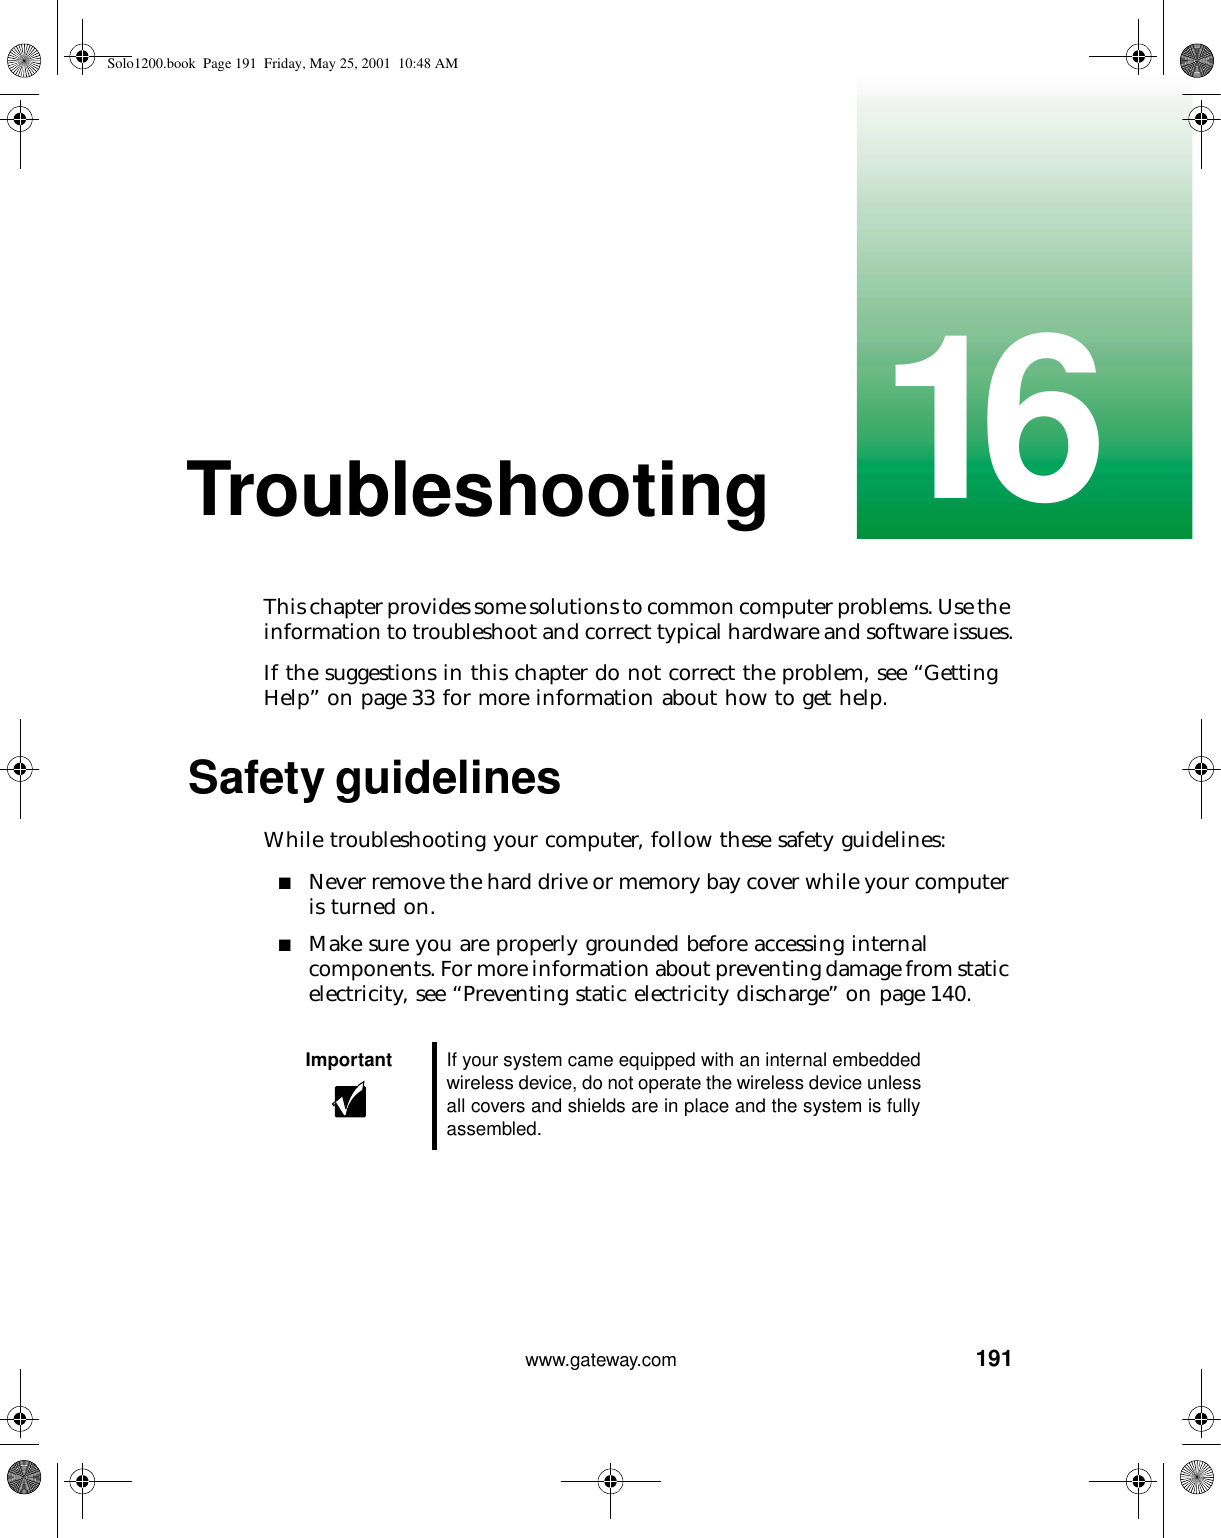 19116www.gateway.comTroubleshootingThis chapter provides some solutions to common computer problems. Use the information to troubleshoot and correct typical hardware and software issues.If the suggestions in this chapter do not correct the problem, see “Getting Help” on page 33 for more information about how to get help.Safety guidelinesWhile troubleshooting your computer, follow these safety guidelines:■Never remove the hard drive or memory bay cover while your computer is turned on.■Make sure you are properly grounded before accessing internal components. For more information about preventing damage from static electricity, see “Preventing static electricity discharge” on page 140.Important If your system came equipped with an internal embedded wireless device, do not operate the wireless device unless all covers and shields are in place and the system is fully assembled.Solo1200.book Page 191 Friday, May 25, 2001 10:48 AM